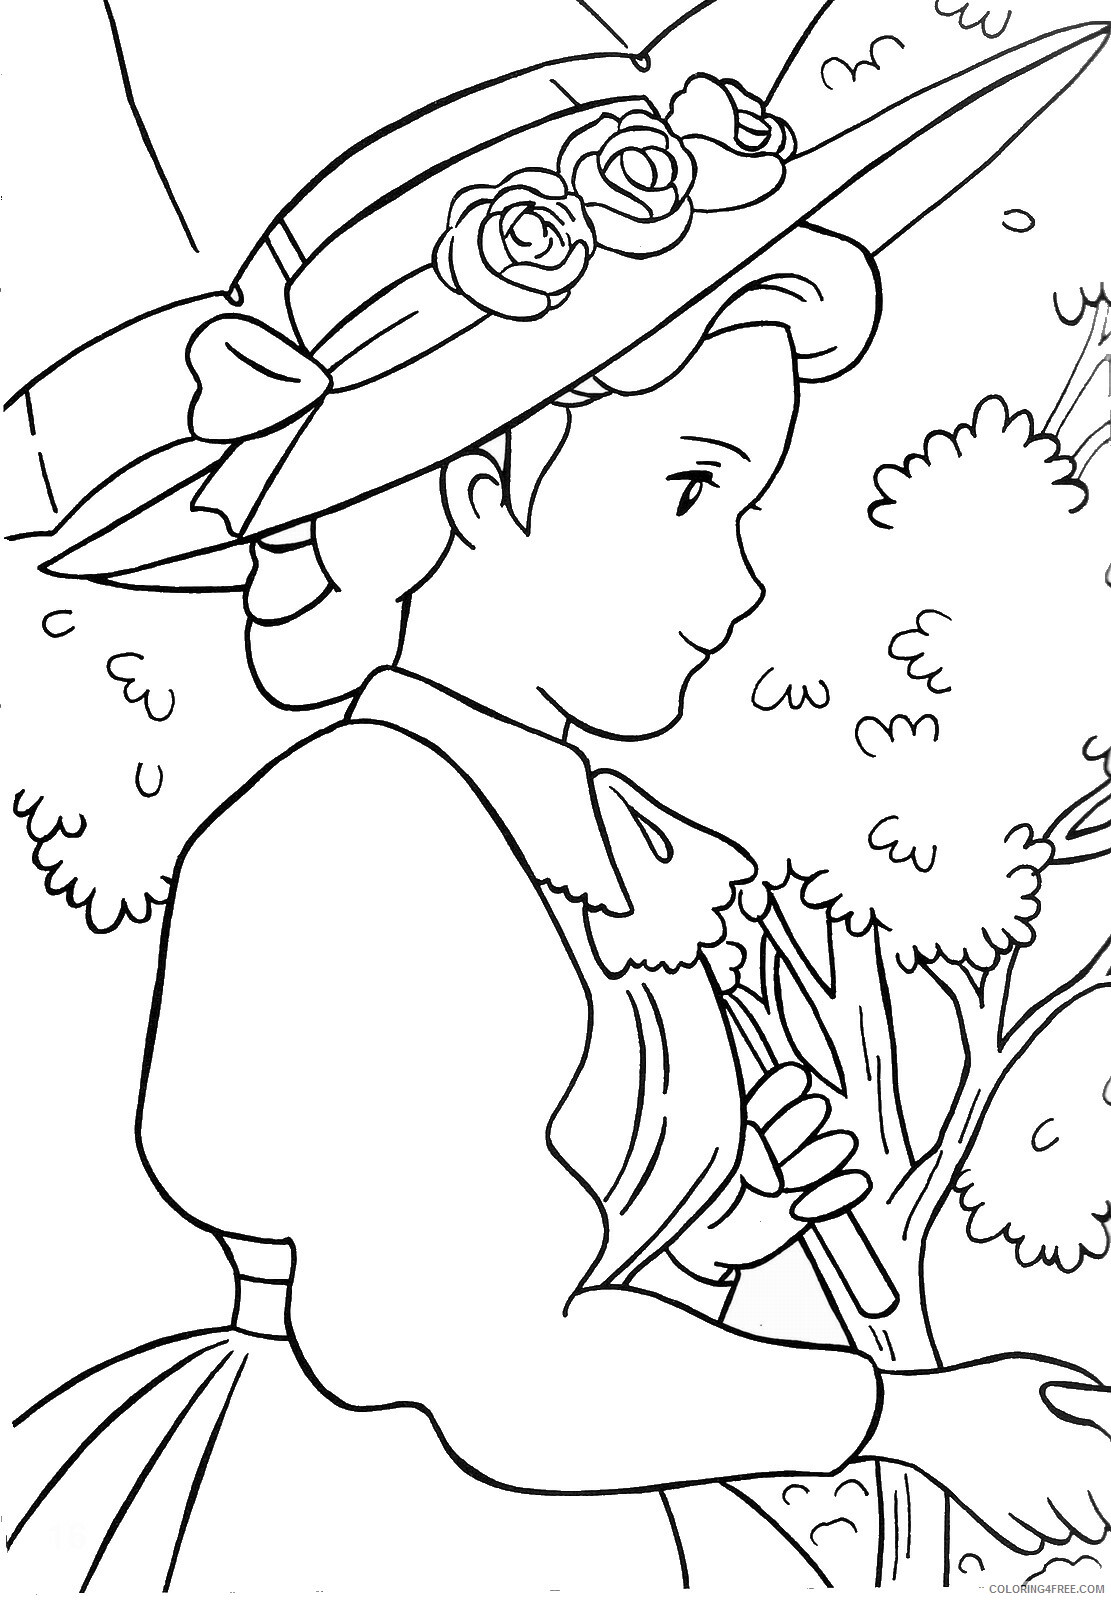 12+ Anne Of Green Gables Coloring Pages Gif